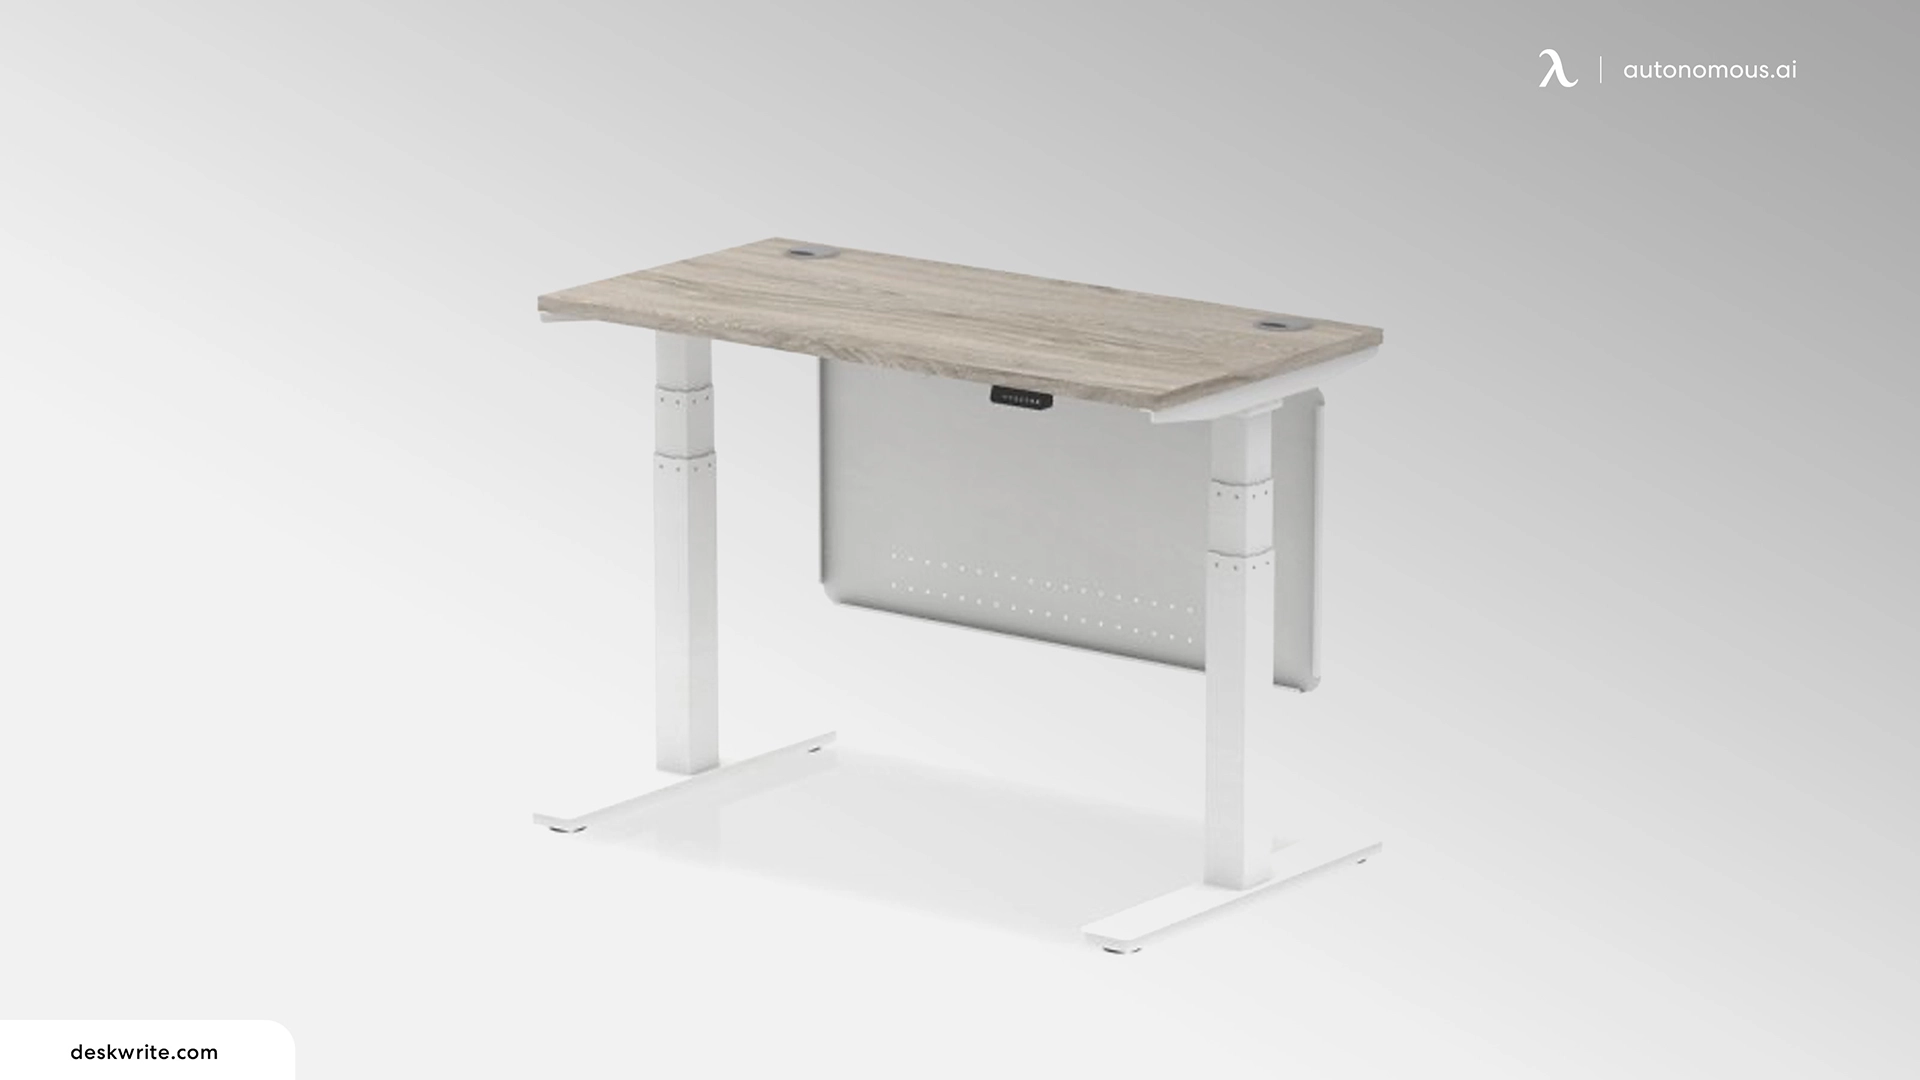 What to Consider When Buying Adjustable Desk Legs?